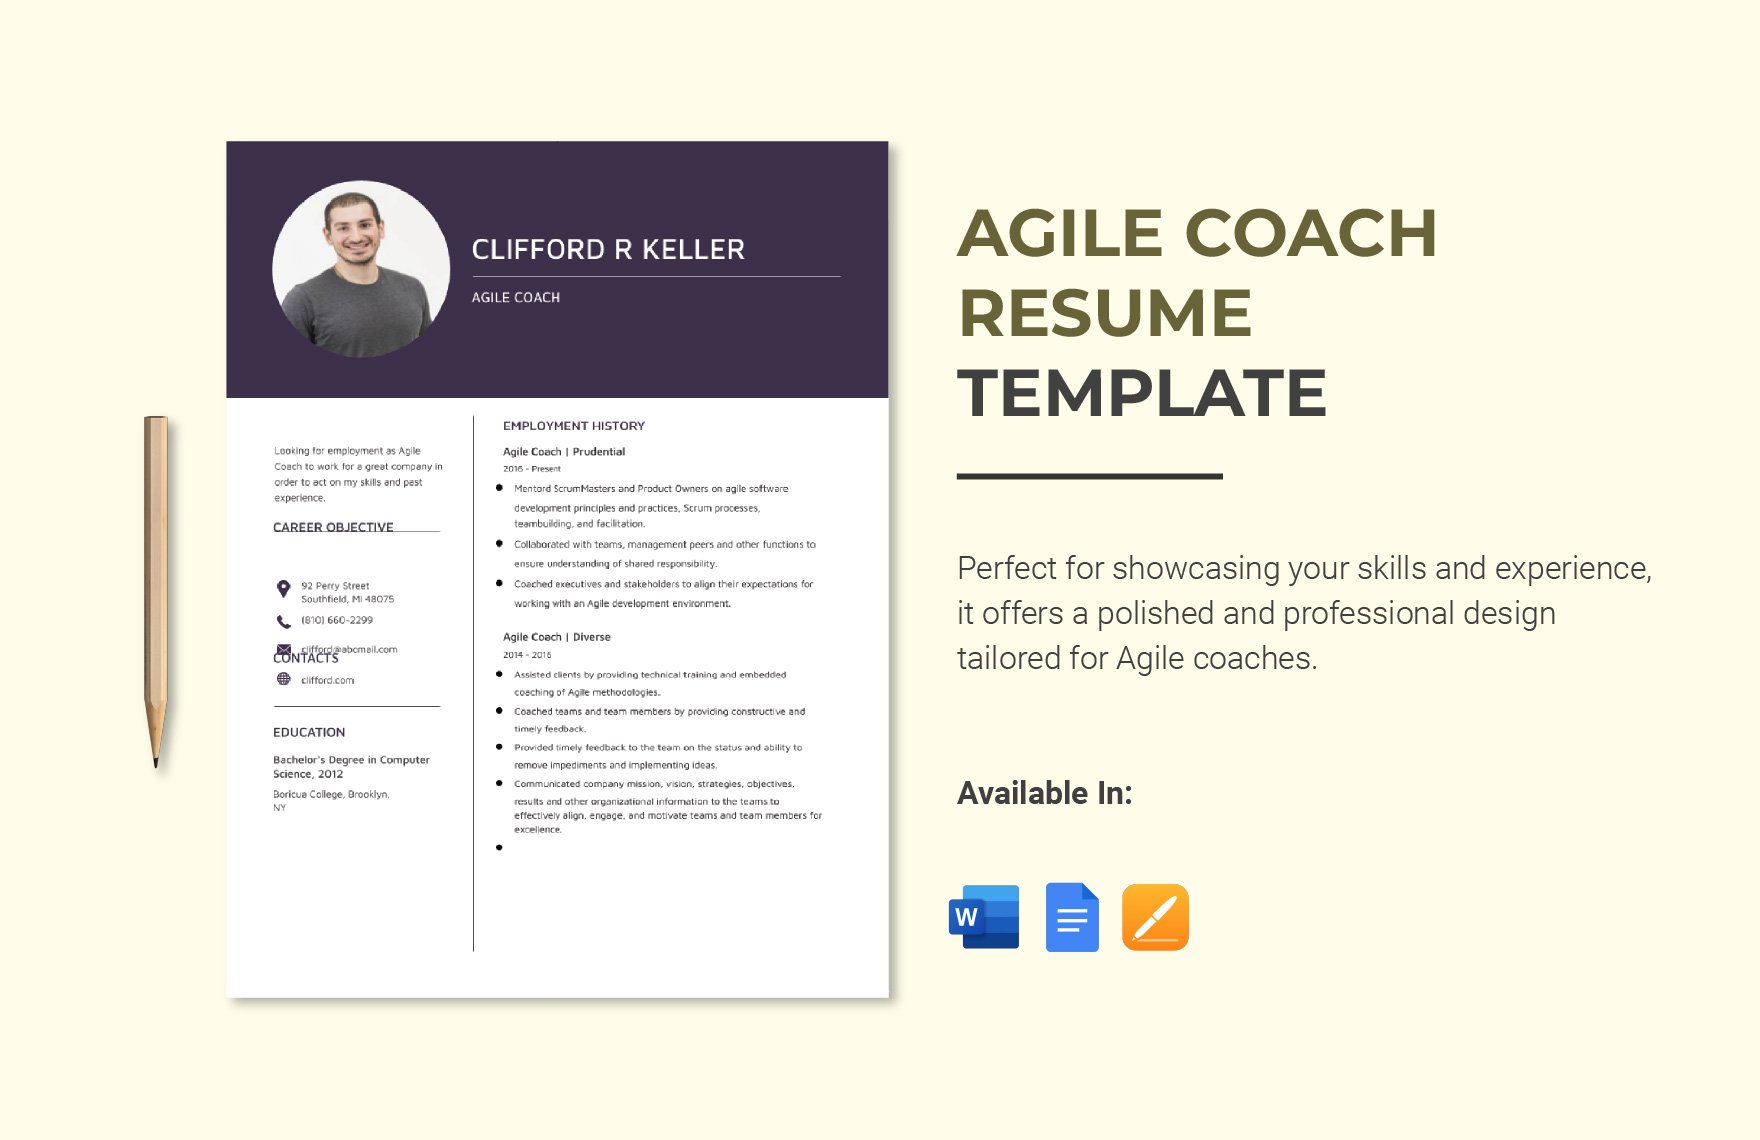 Agile Coach Resume in Word, Google Docs, Apple Pages